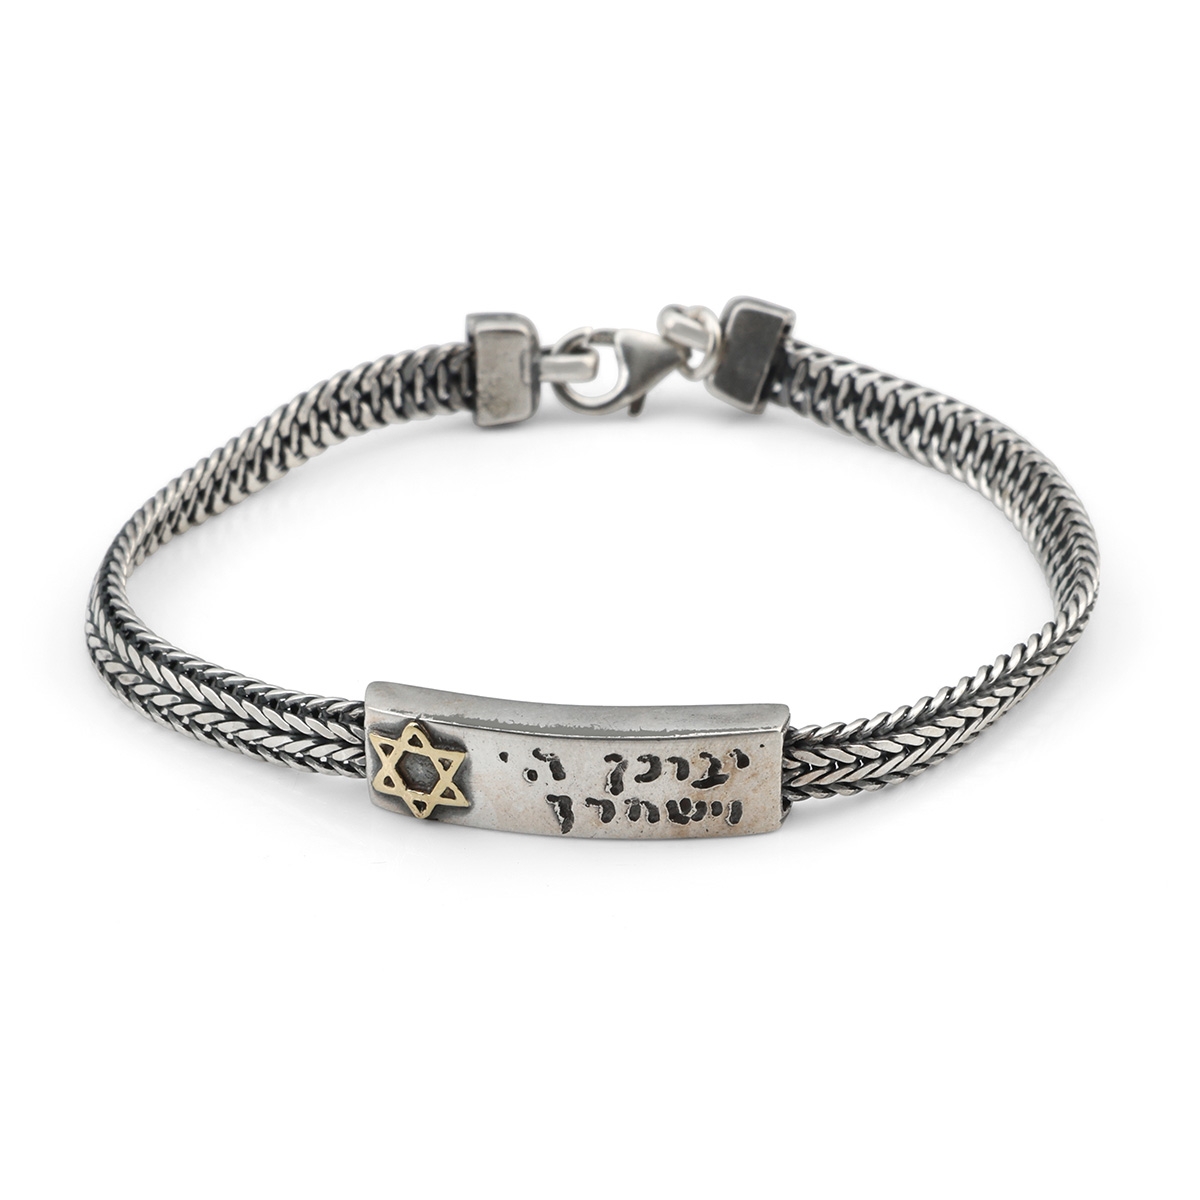 Silver Bracelet with Engraved Priestly Blessing - Unisex - 1